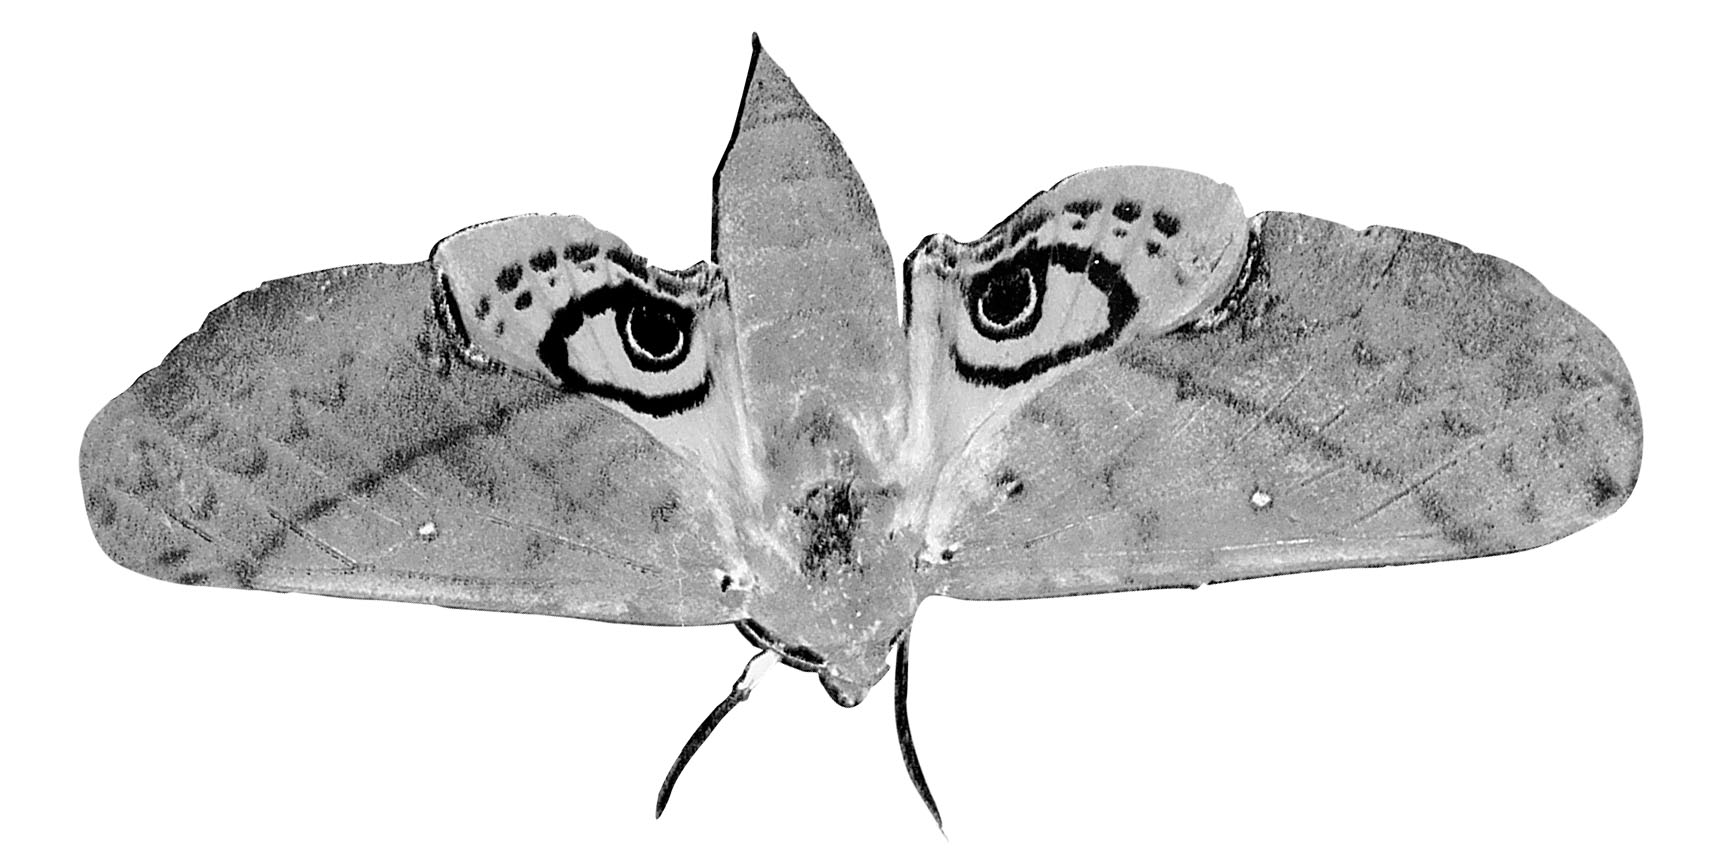 The Hawk Moth looks like a tiger face